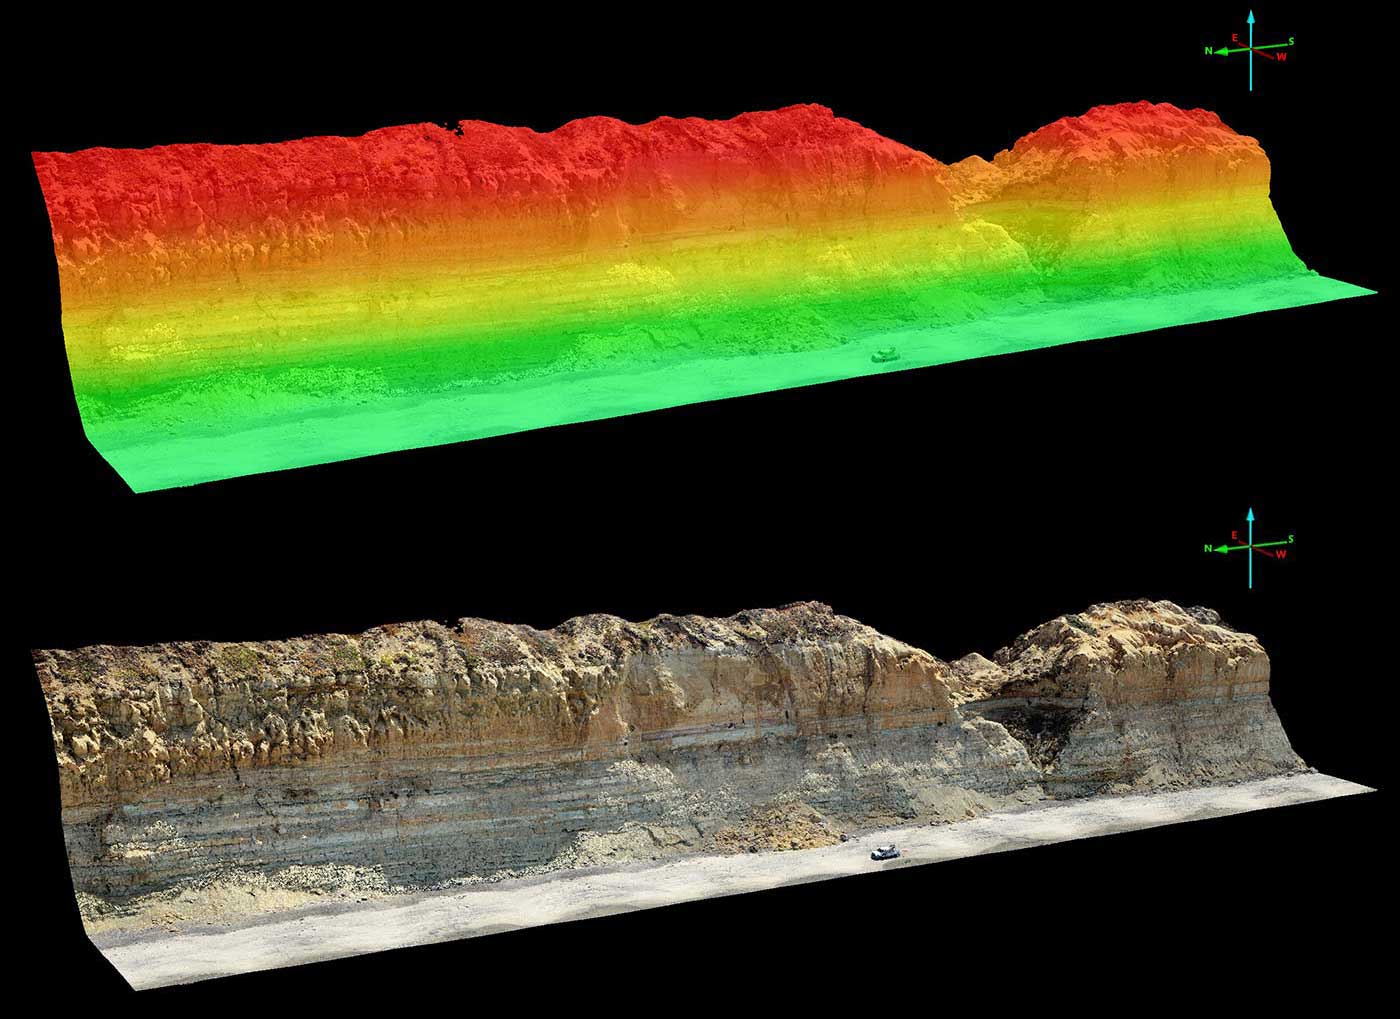 LiDAR scanning creates high resolution spatial maps of the cliff face and beach elevation.